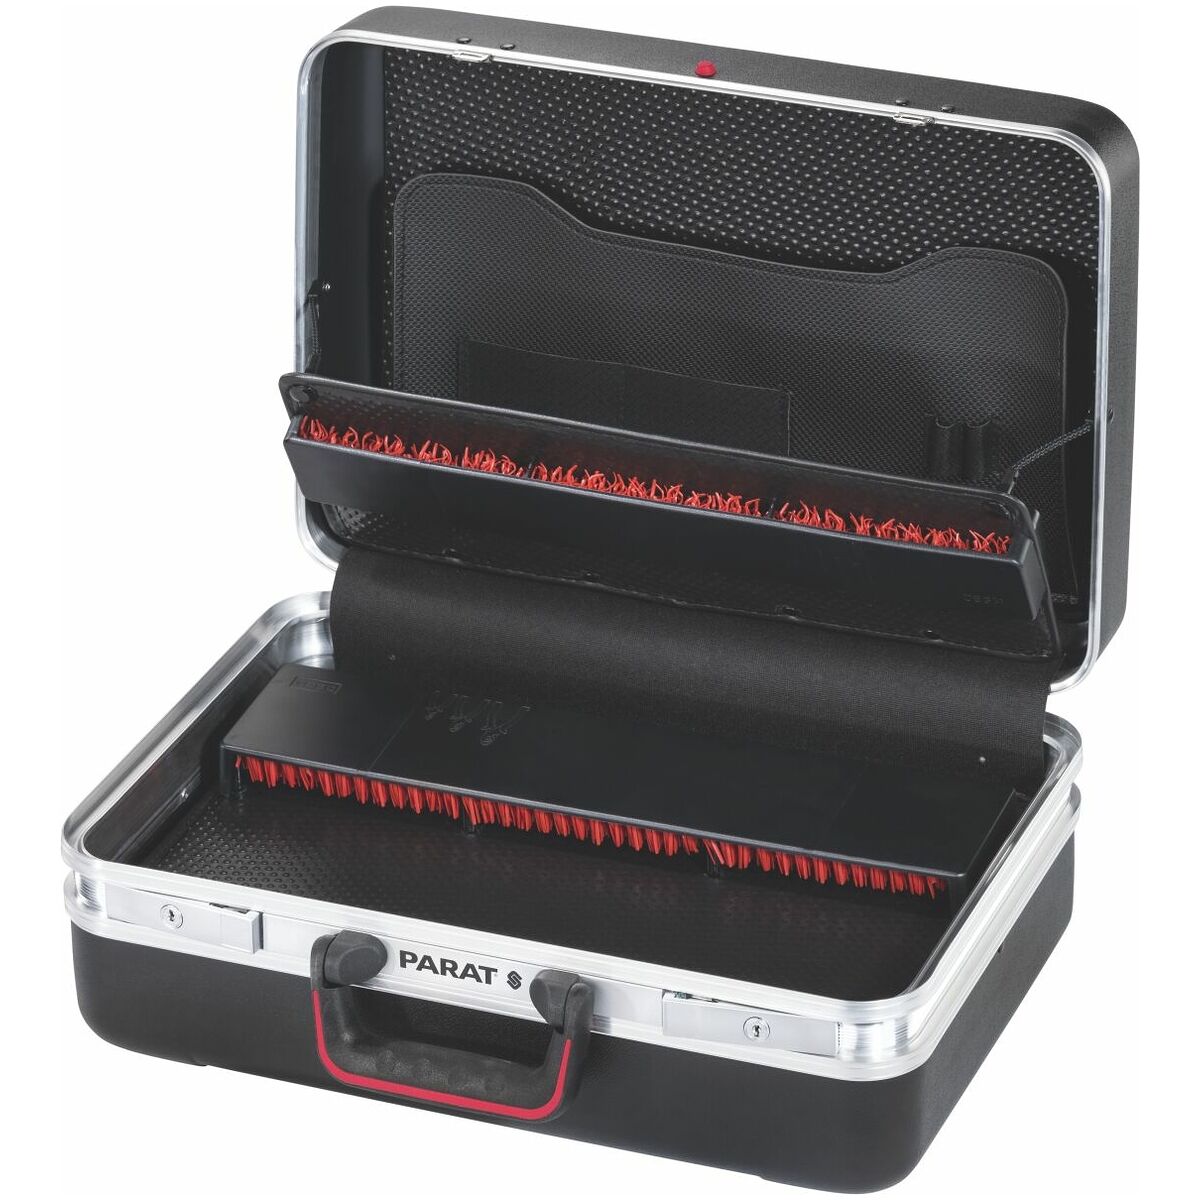 X-ABS tool case with base shell, 2 tool boards and TSA locks 1